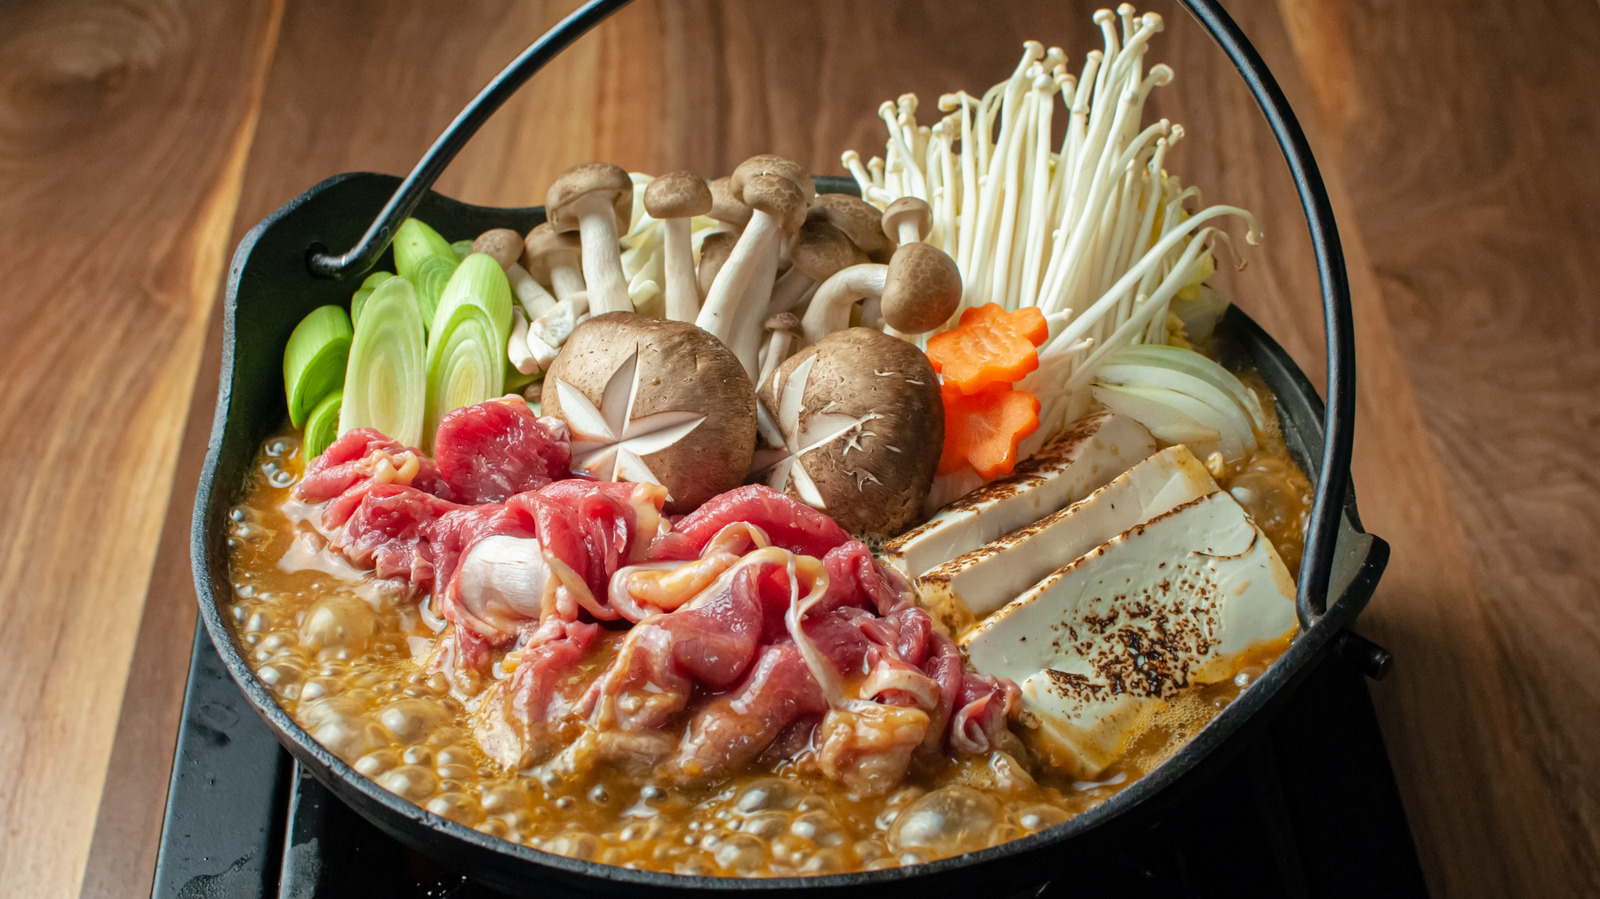 https://www.tastingtable.com/img/gallery/what-exactly-is-japanese-hot-pot/l-intro-1658510238.jpg